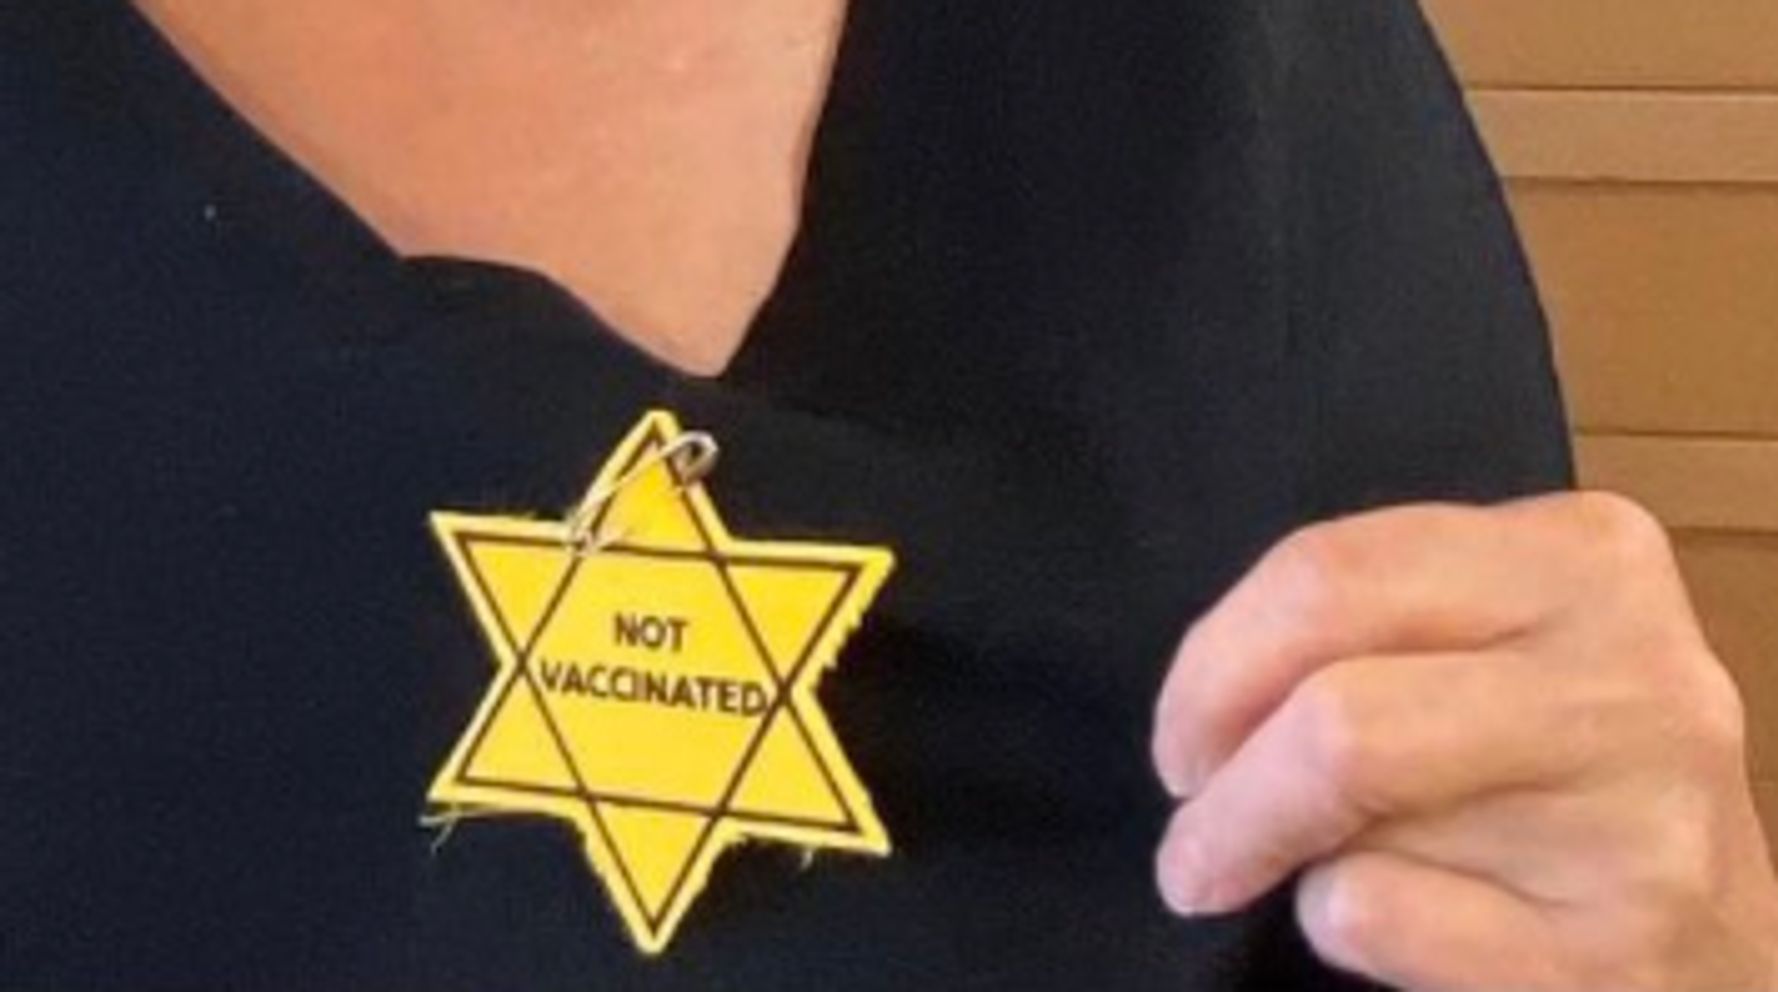 Nashville Shop That Sold 'Not Vaccinated' Star Of David Patches Apologizes For 'Insensitivity'